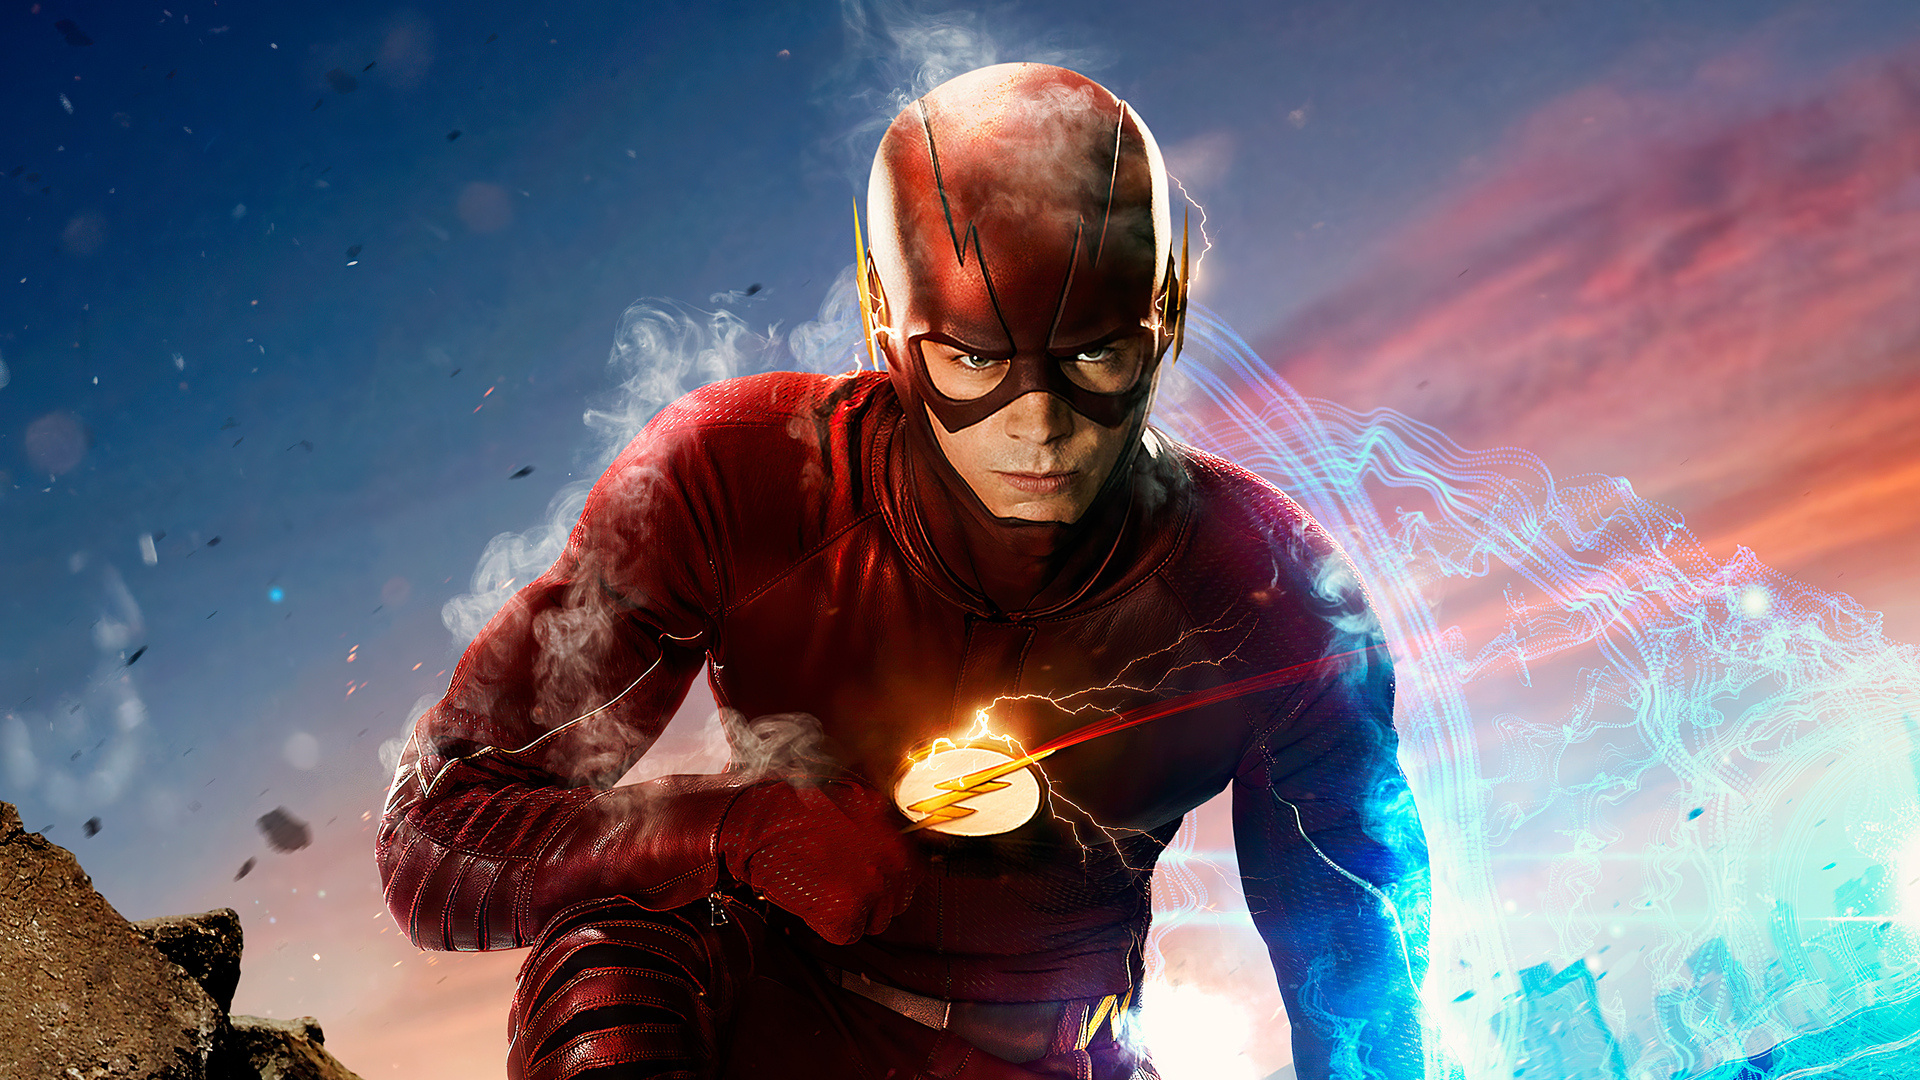 Flash (TV Series): Barry Allen, The Fastest Man Alive, Adaptation of the DC Comics character. 1920x1080 Full HD Wallpaper.